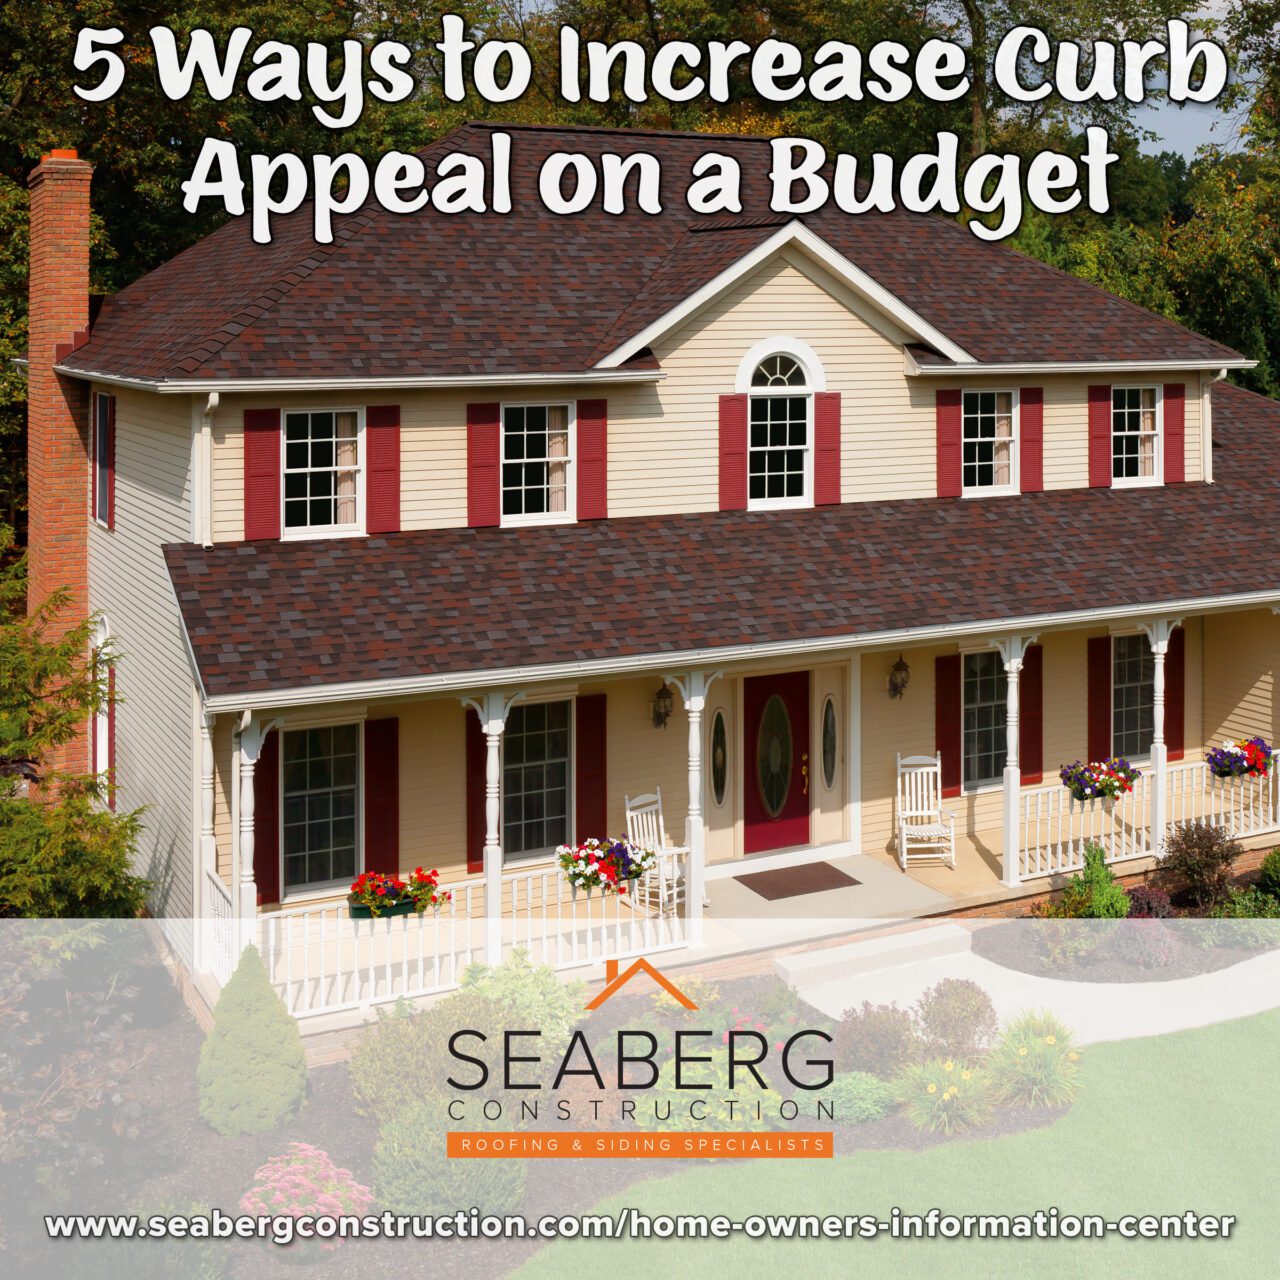 Seaberg Construction Blog: 5 Ways to Increase Curb Appeal on a Budget